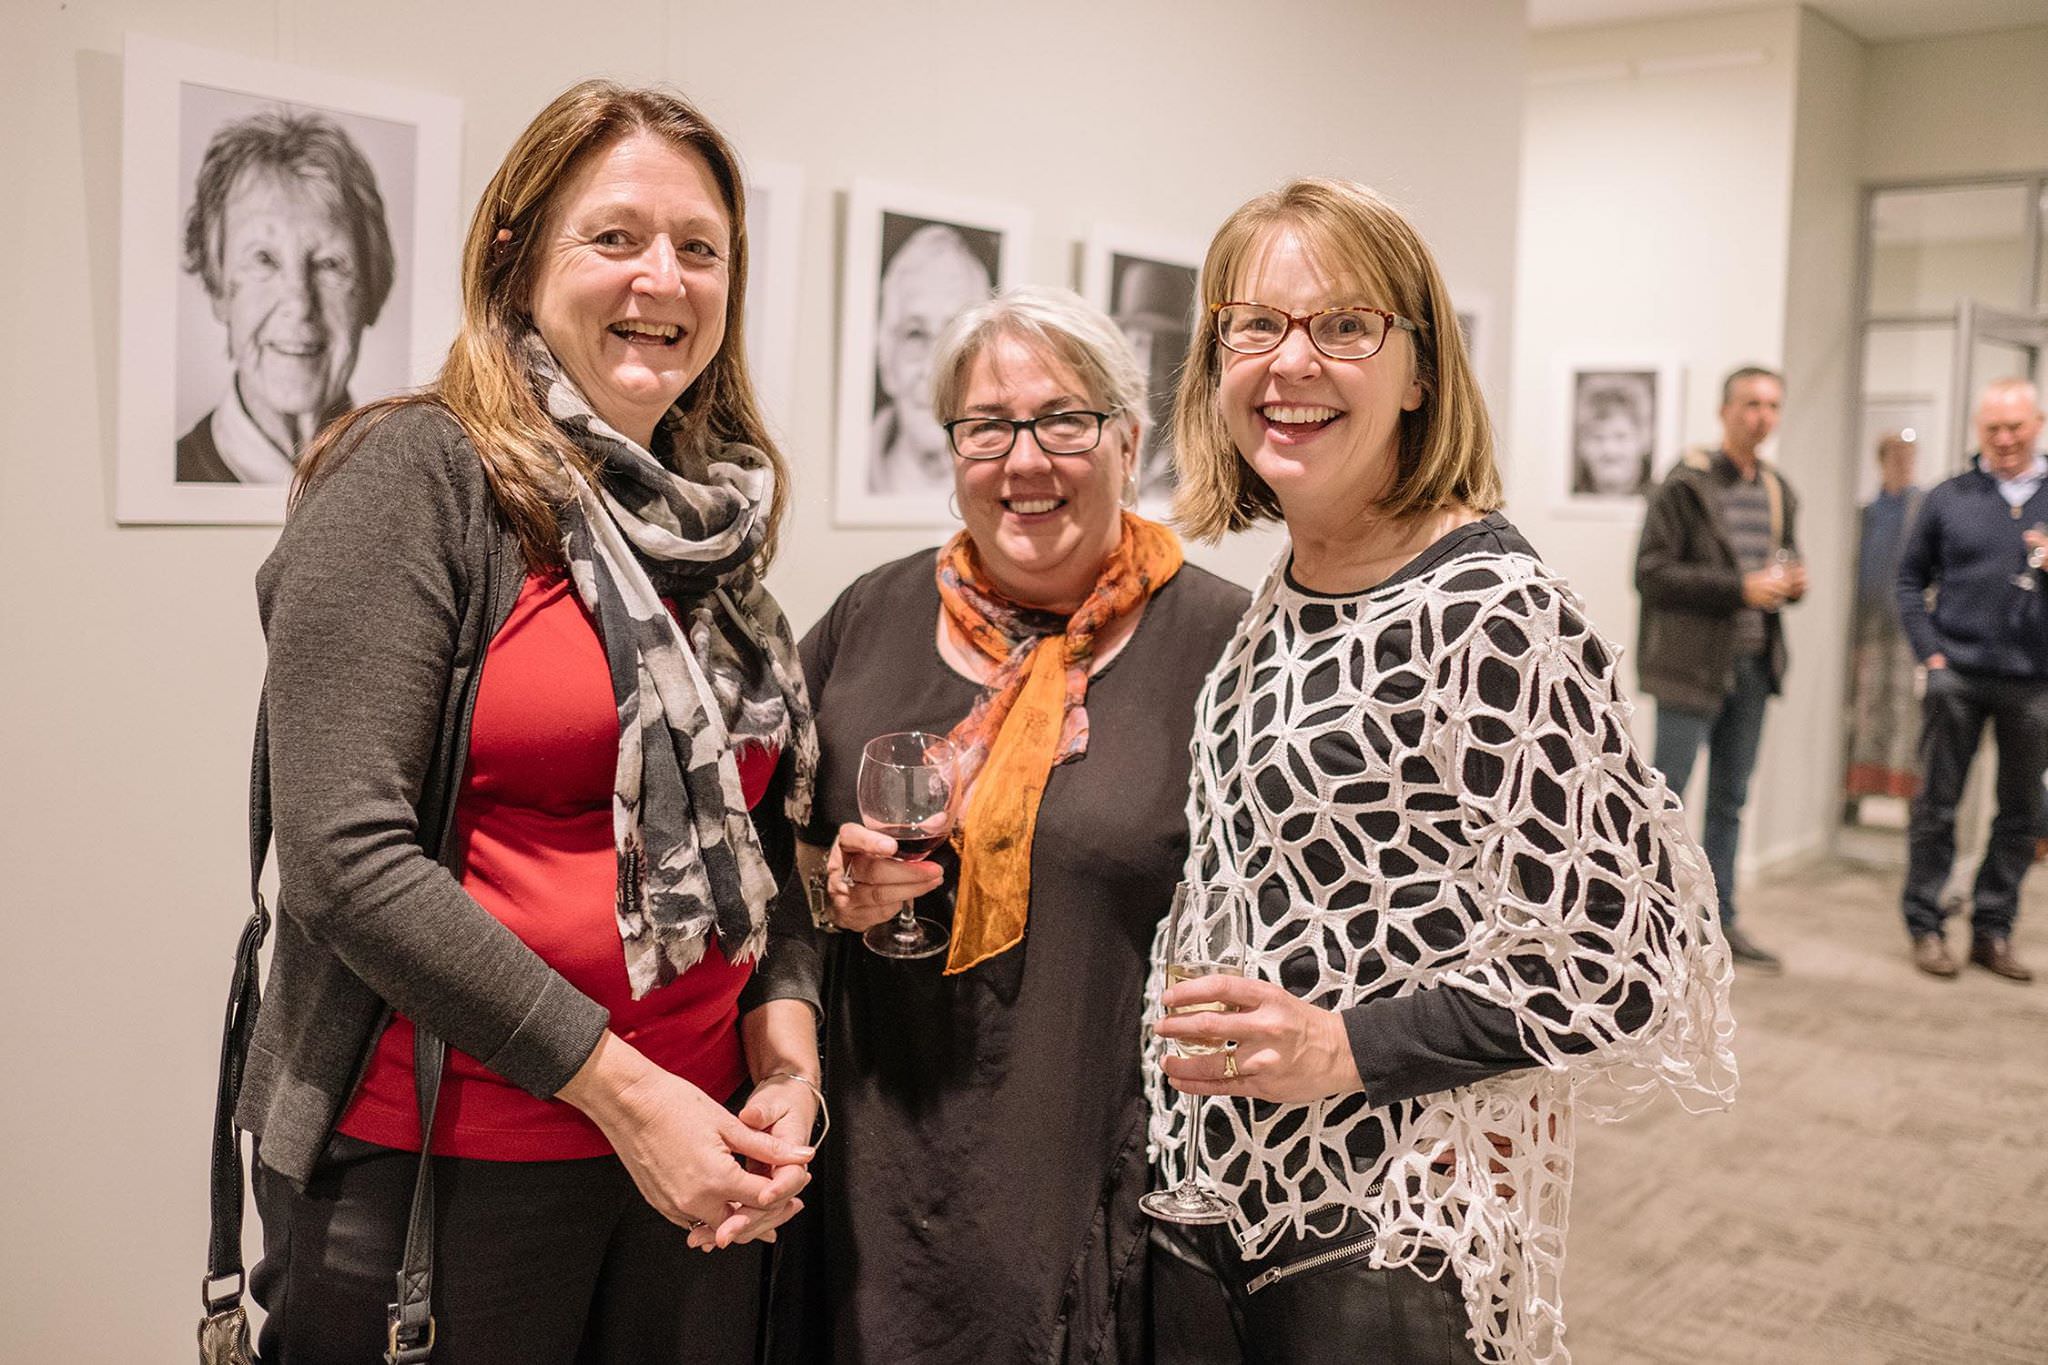 Nicole Wasmann, Caro Telfer, and Kerryn Chia at the Faces of West Arthur exhibition in Darkan